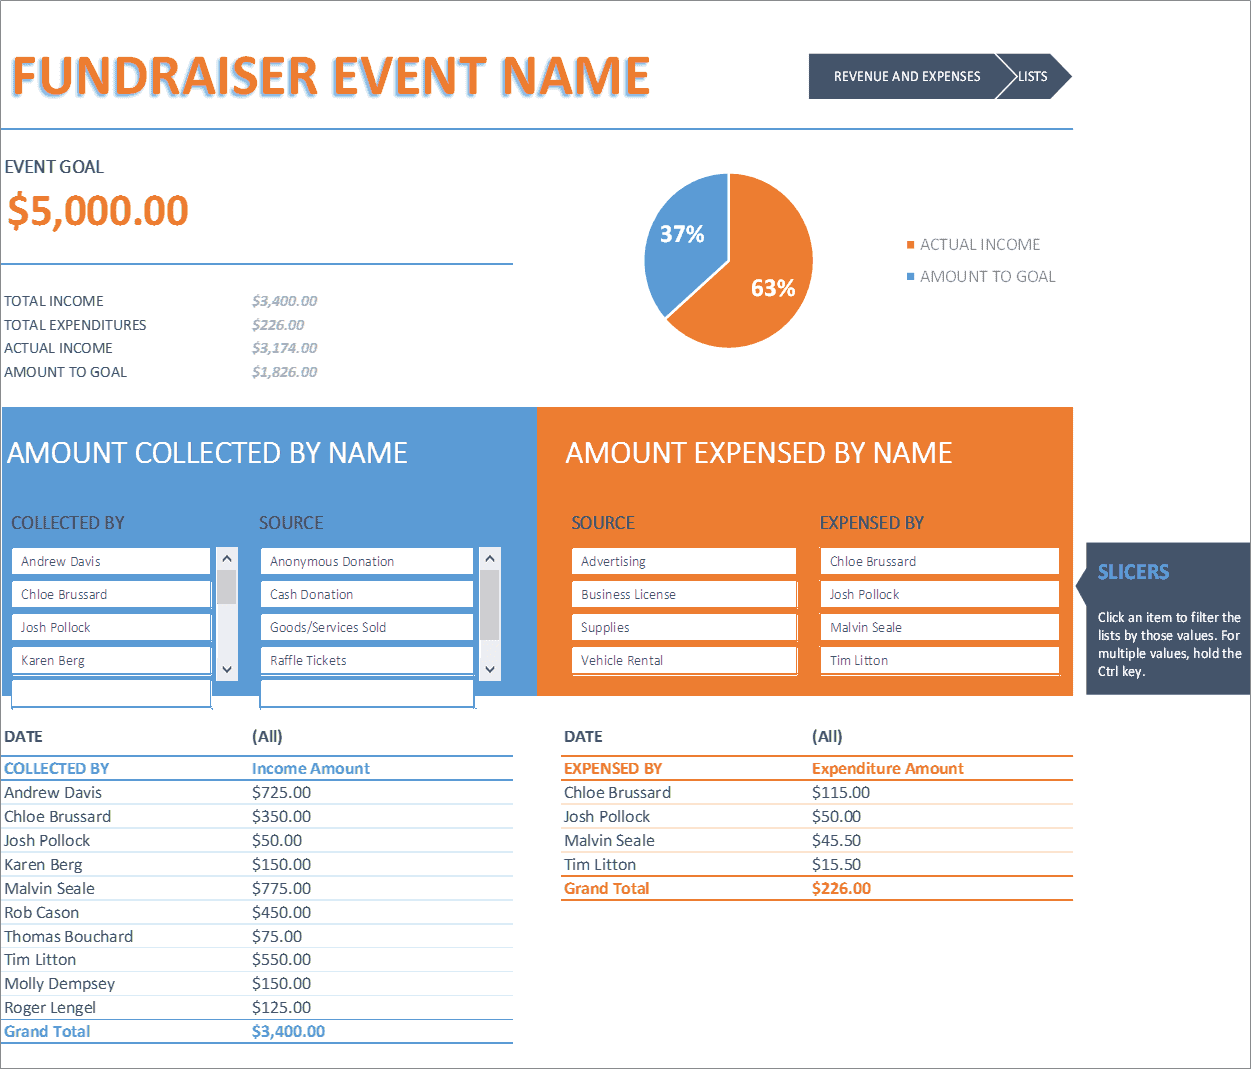 event budget excel template